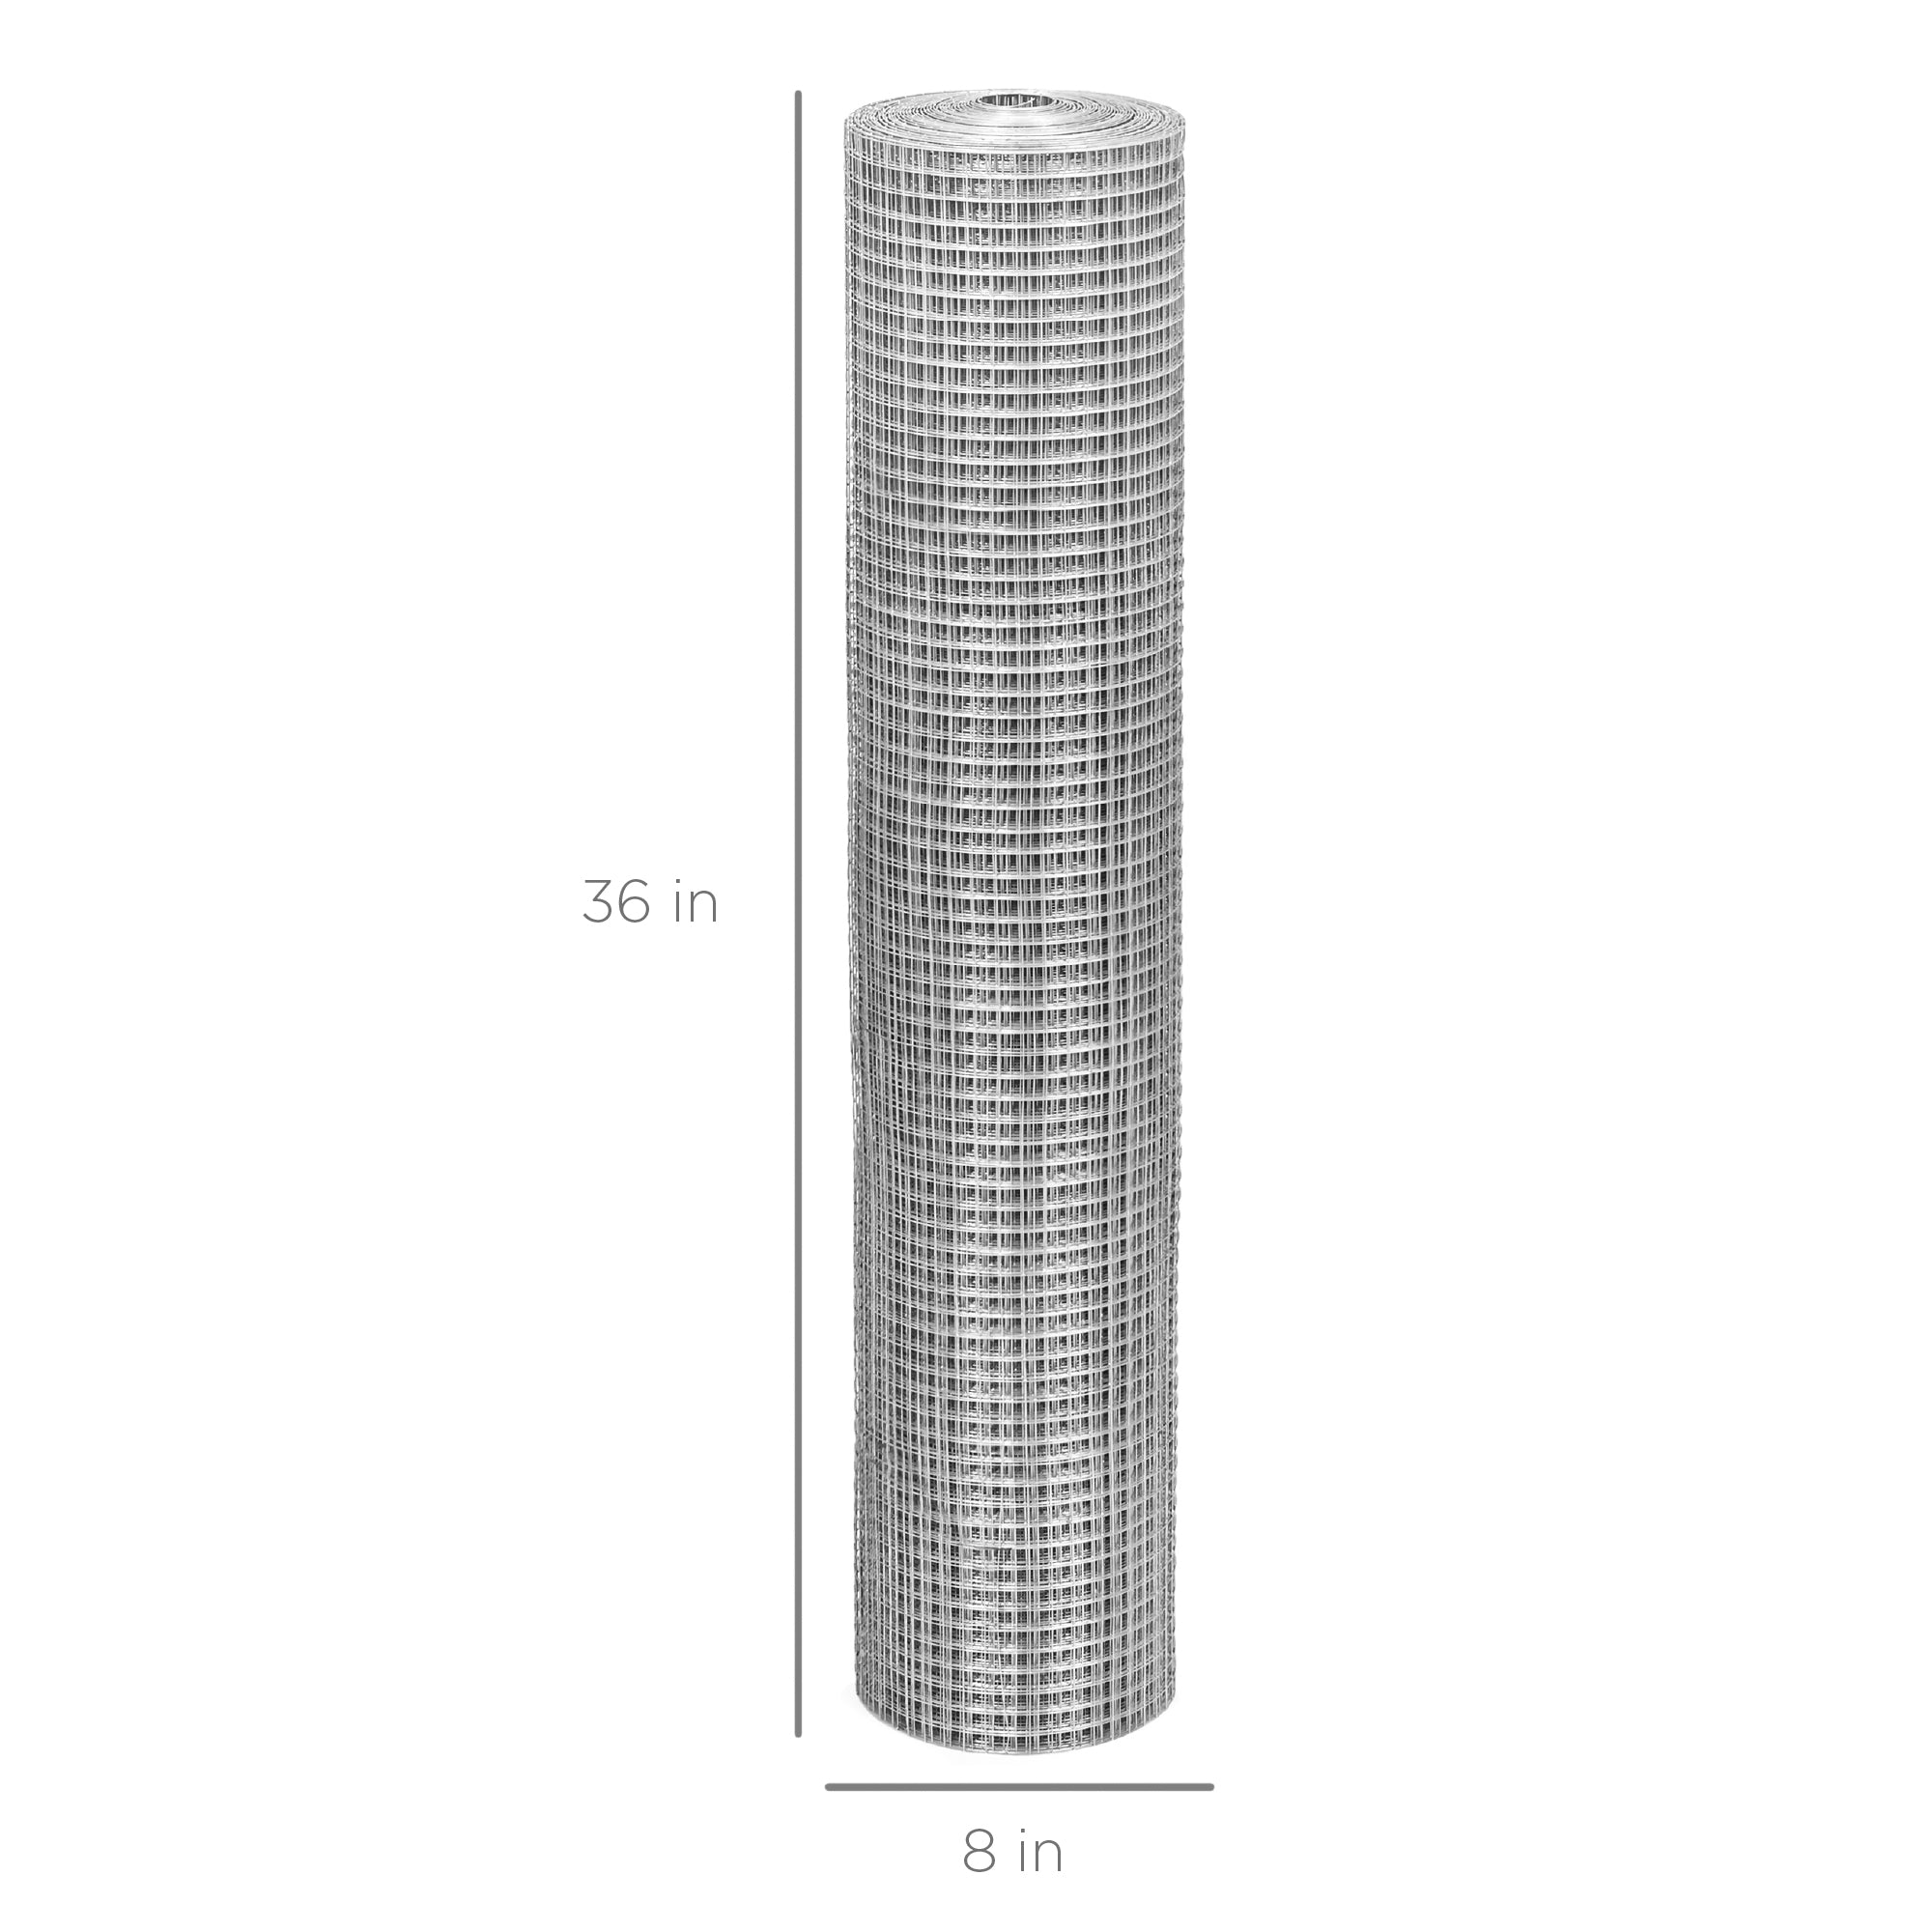 STAINLESS STEEL 1/2 Mesh Hardware Cloth: 24 x 100' Roll - 18 gauge